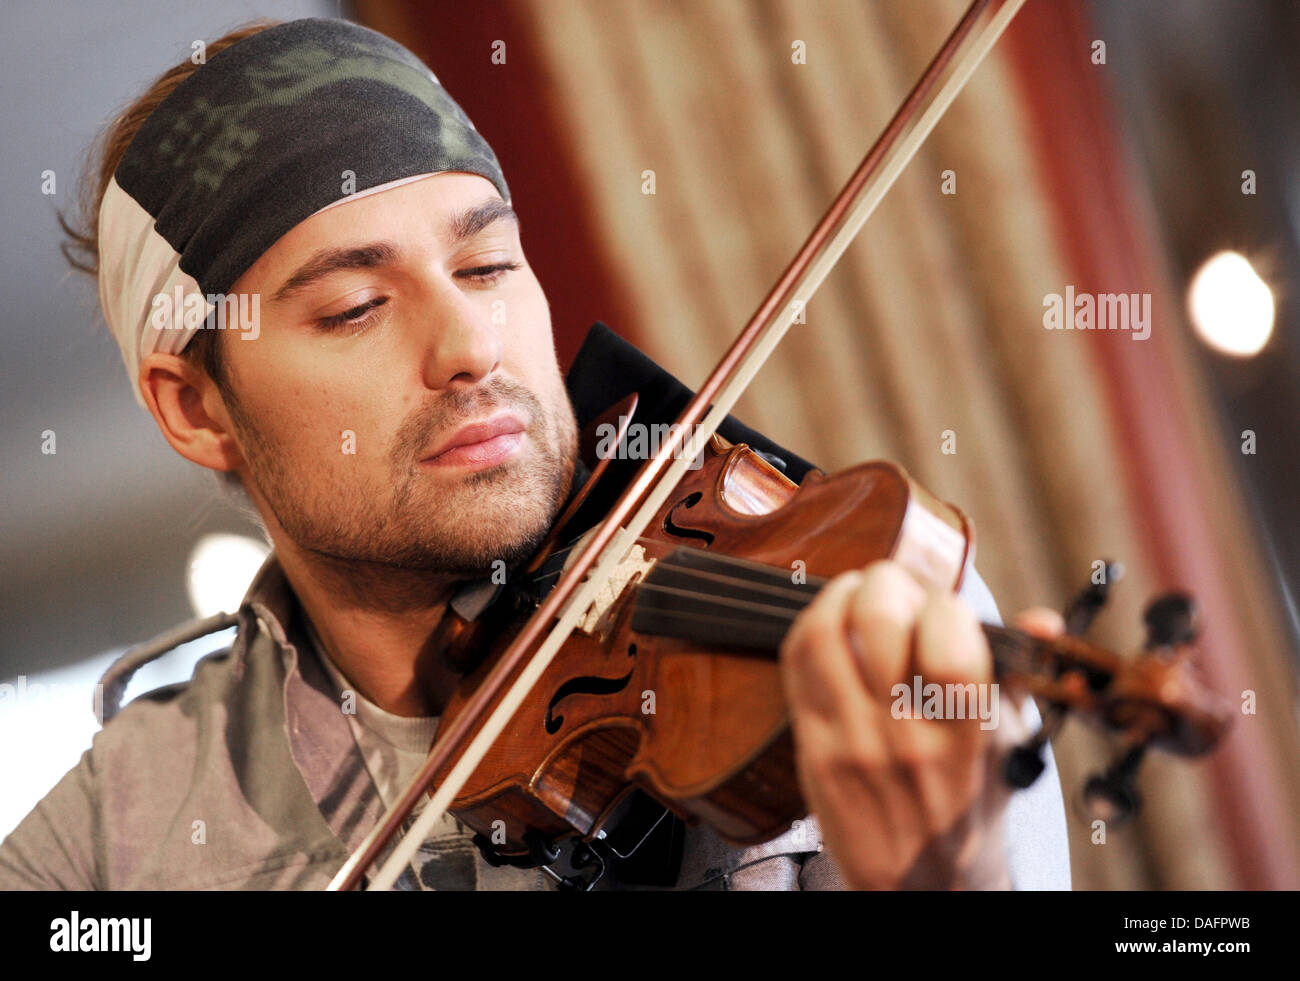 Violinist David Garrett plays during a press conference in Hamburg, Germany, 09 December 2011. Gerrett will come to 02 World in Hamburg with band and orchestra for his 'Rock Anthems' tour on 12 April 2012. Photo: ANGELIKA WARMUTH Stock Photo